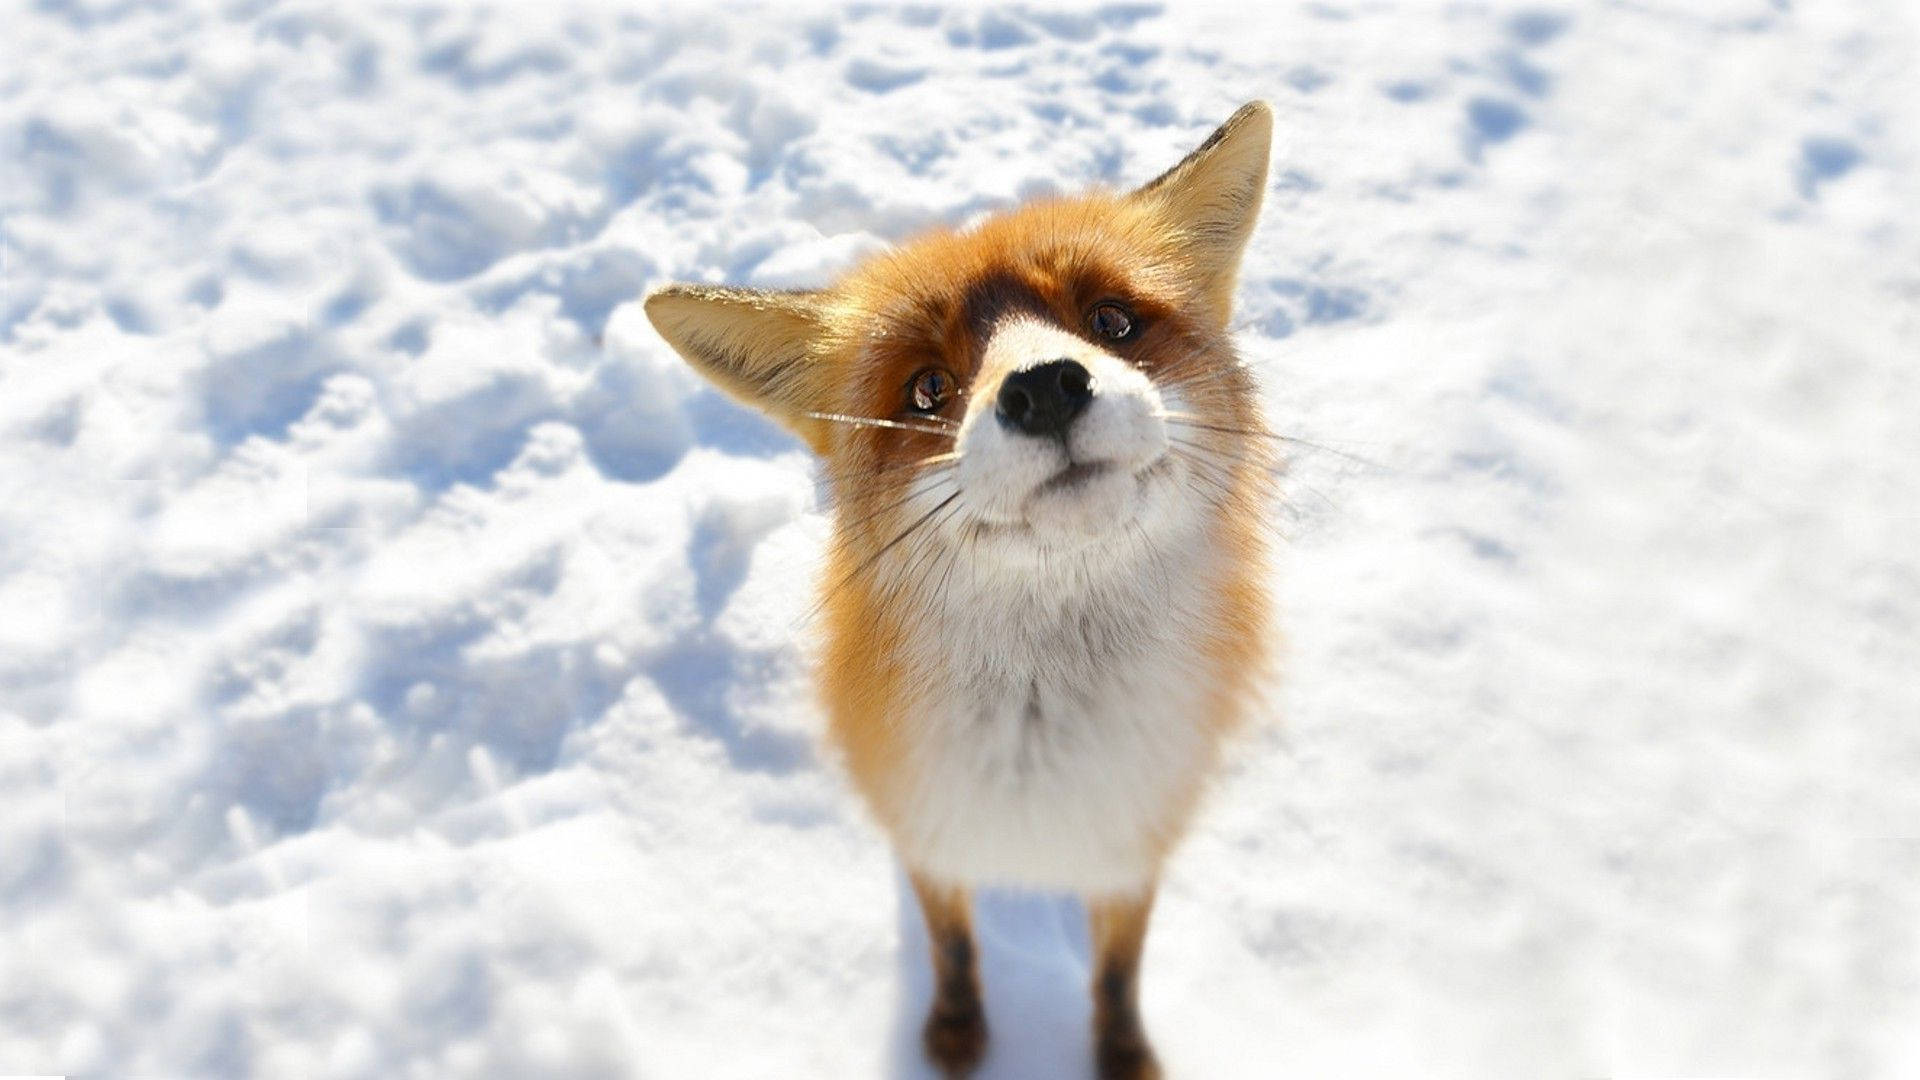 A curious fox looking for adventure Wallpaper